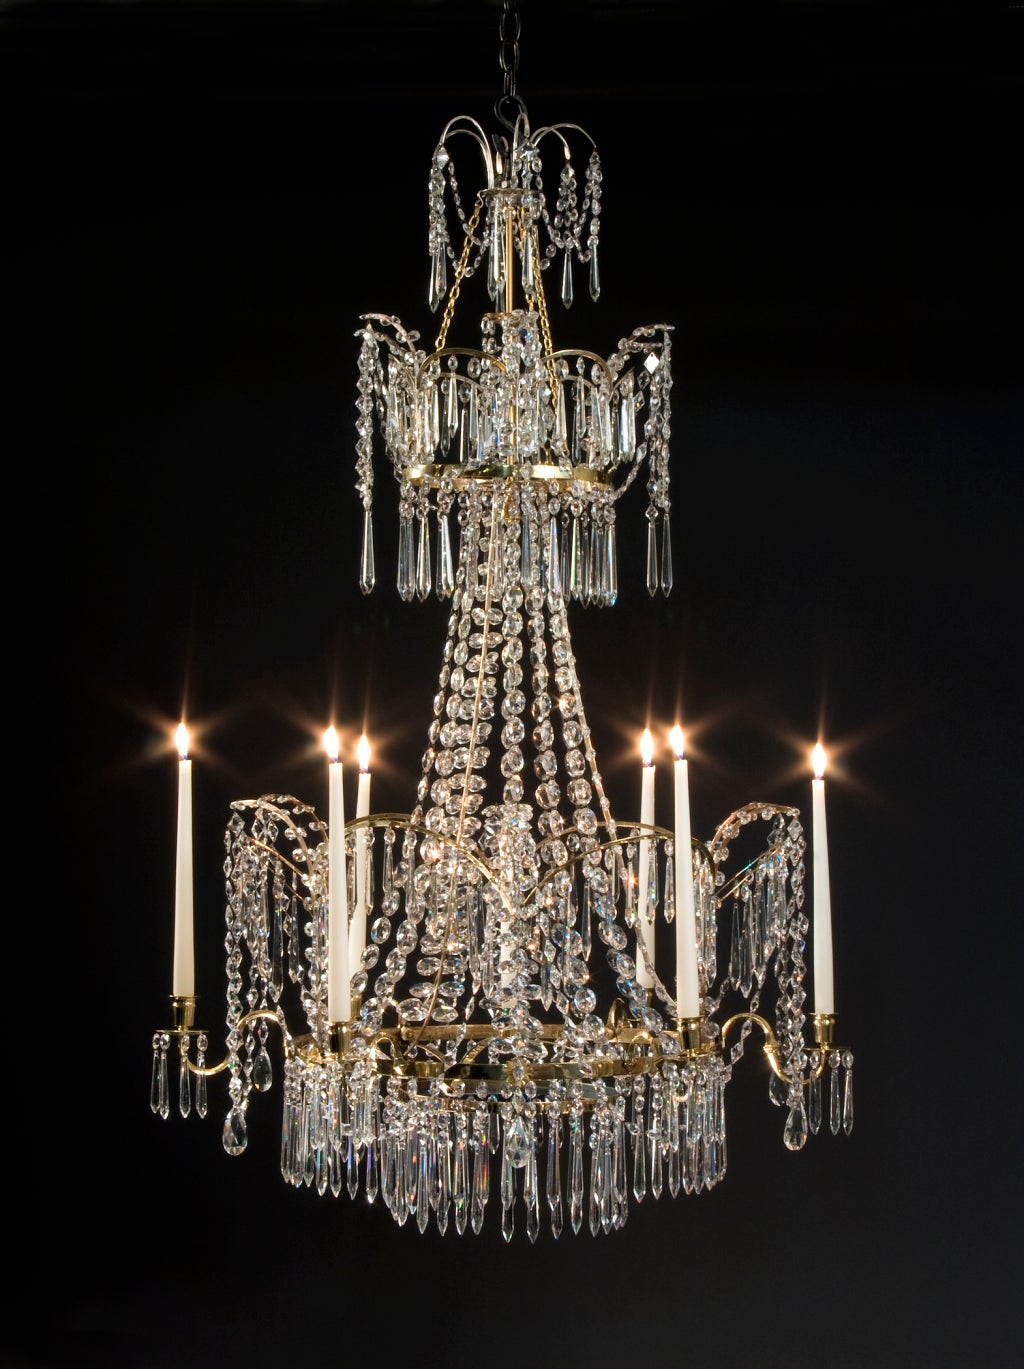 The two tiered corona fitted with arches hung with swags and faceted drops, the central cascade of graduated strands and feather sprays, the principal tier fitted with six S-shape arms supporting urn form candleholders alternating with arches